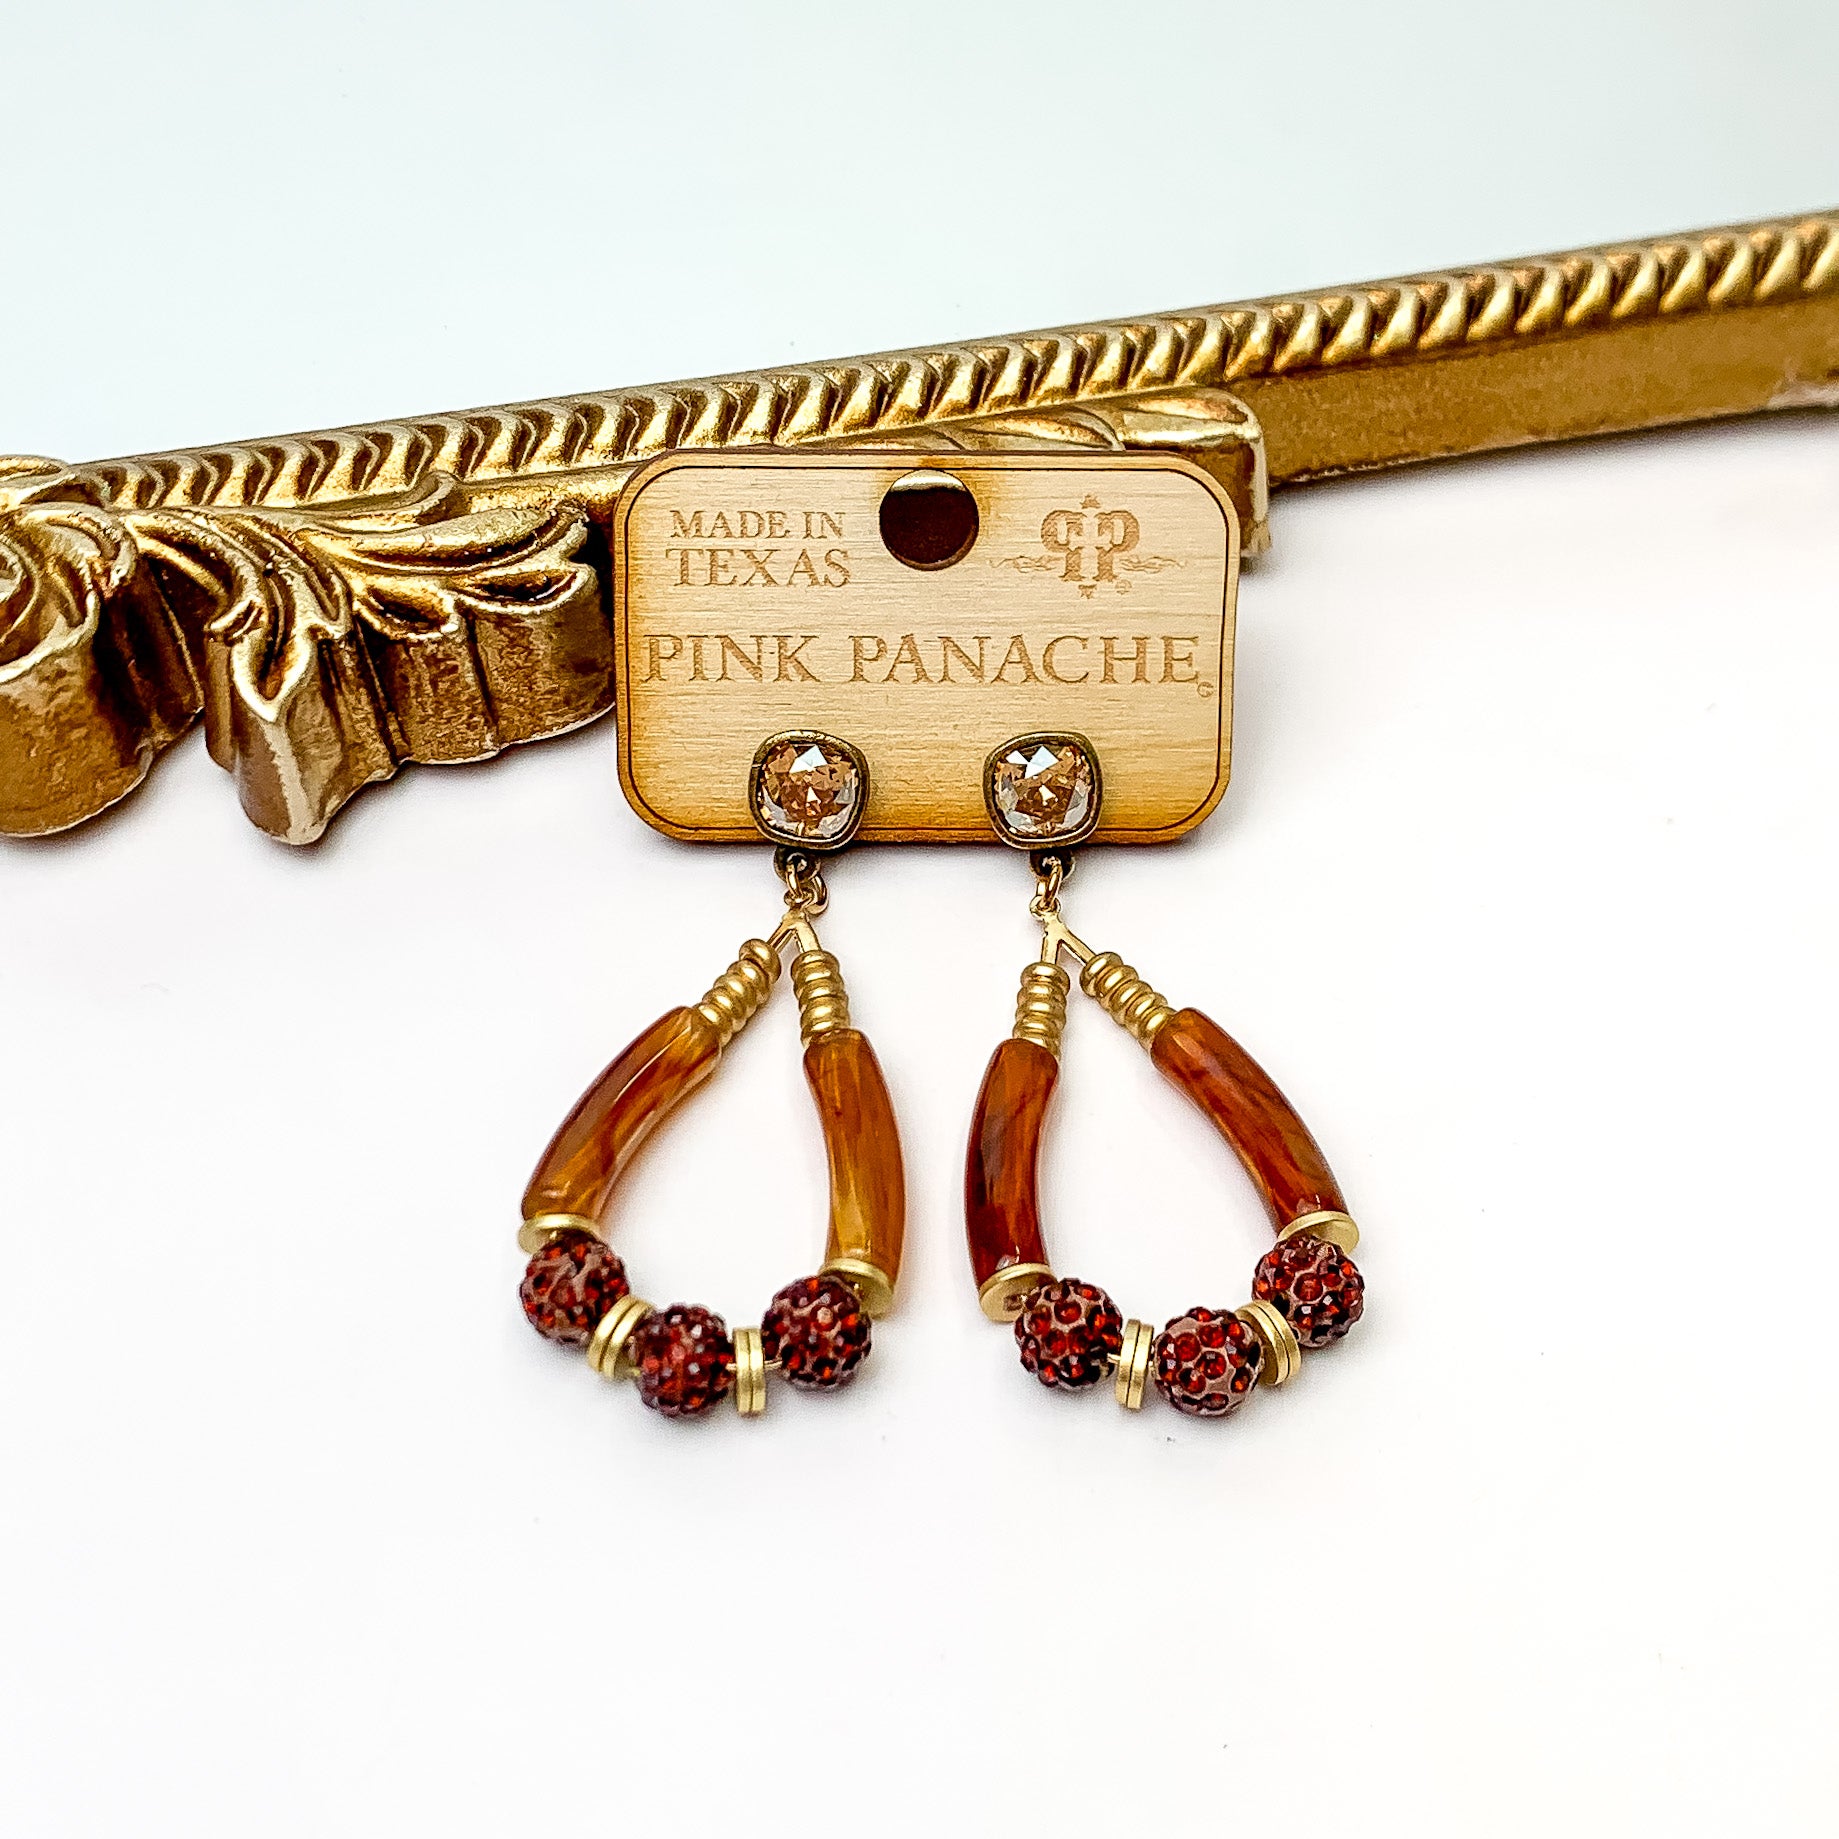 Golden shadow cushion cut crystal post earrings with a teardrop dangle. The teardrop dangle includes gold beads, brown crystal beads, and tortoise bamboo beads. These earrings are pictured on a wooden earring holder on a white background in front of a gold mirror. 